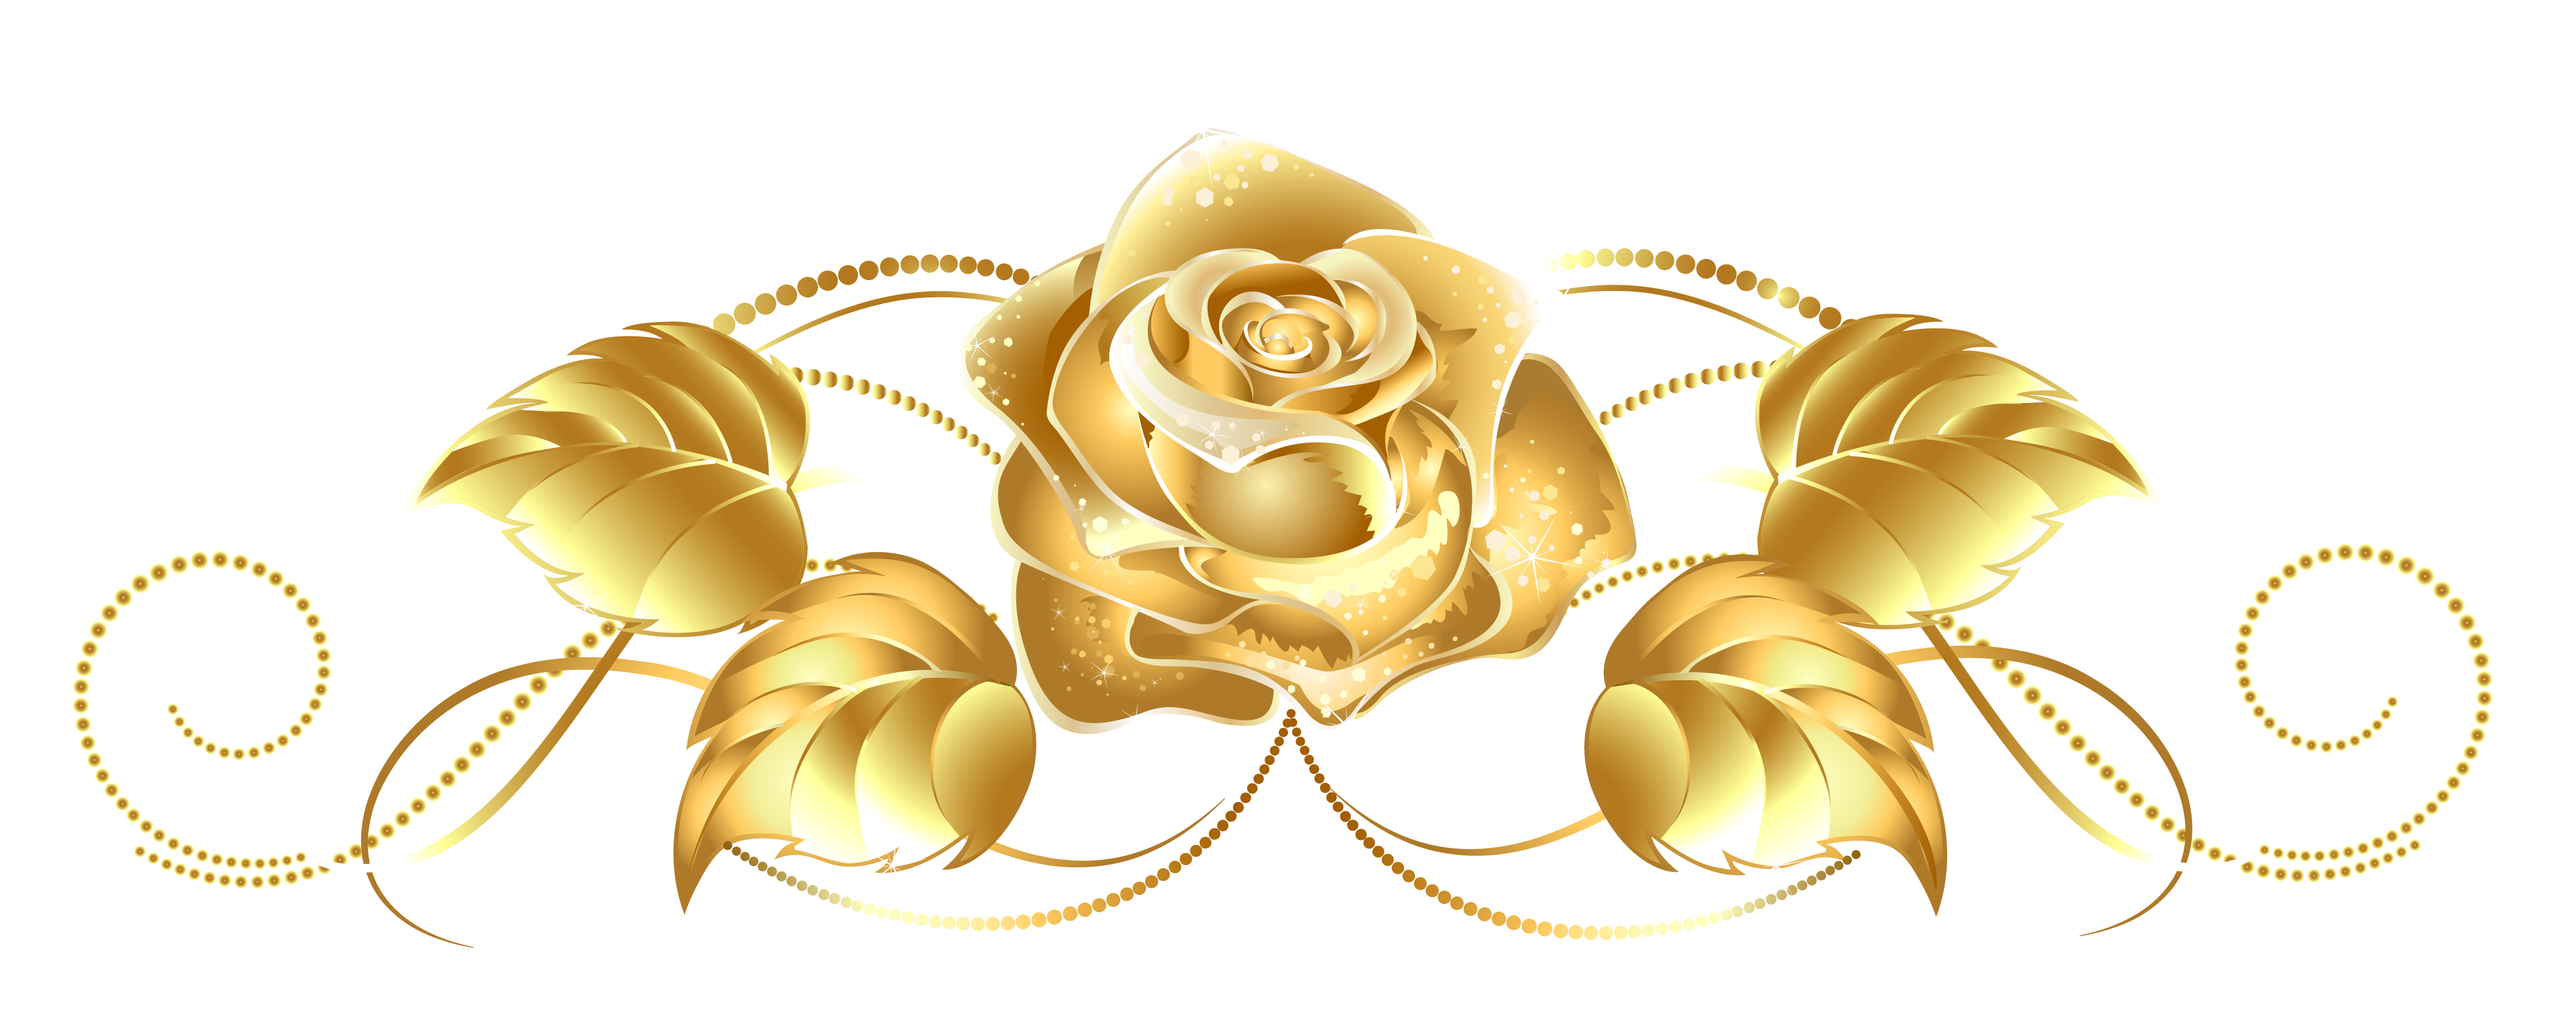 Free Gold Flowers Png, Download Free Gold Flowers Png png images, Free ...